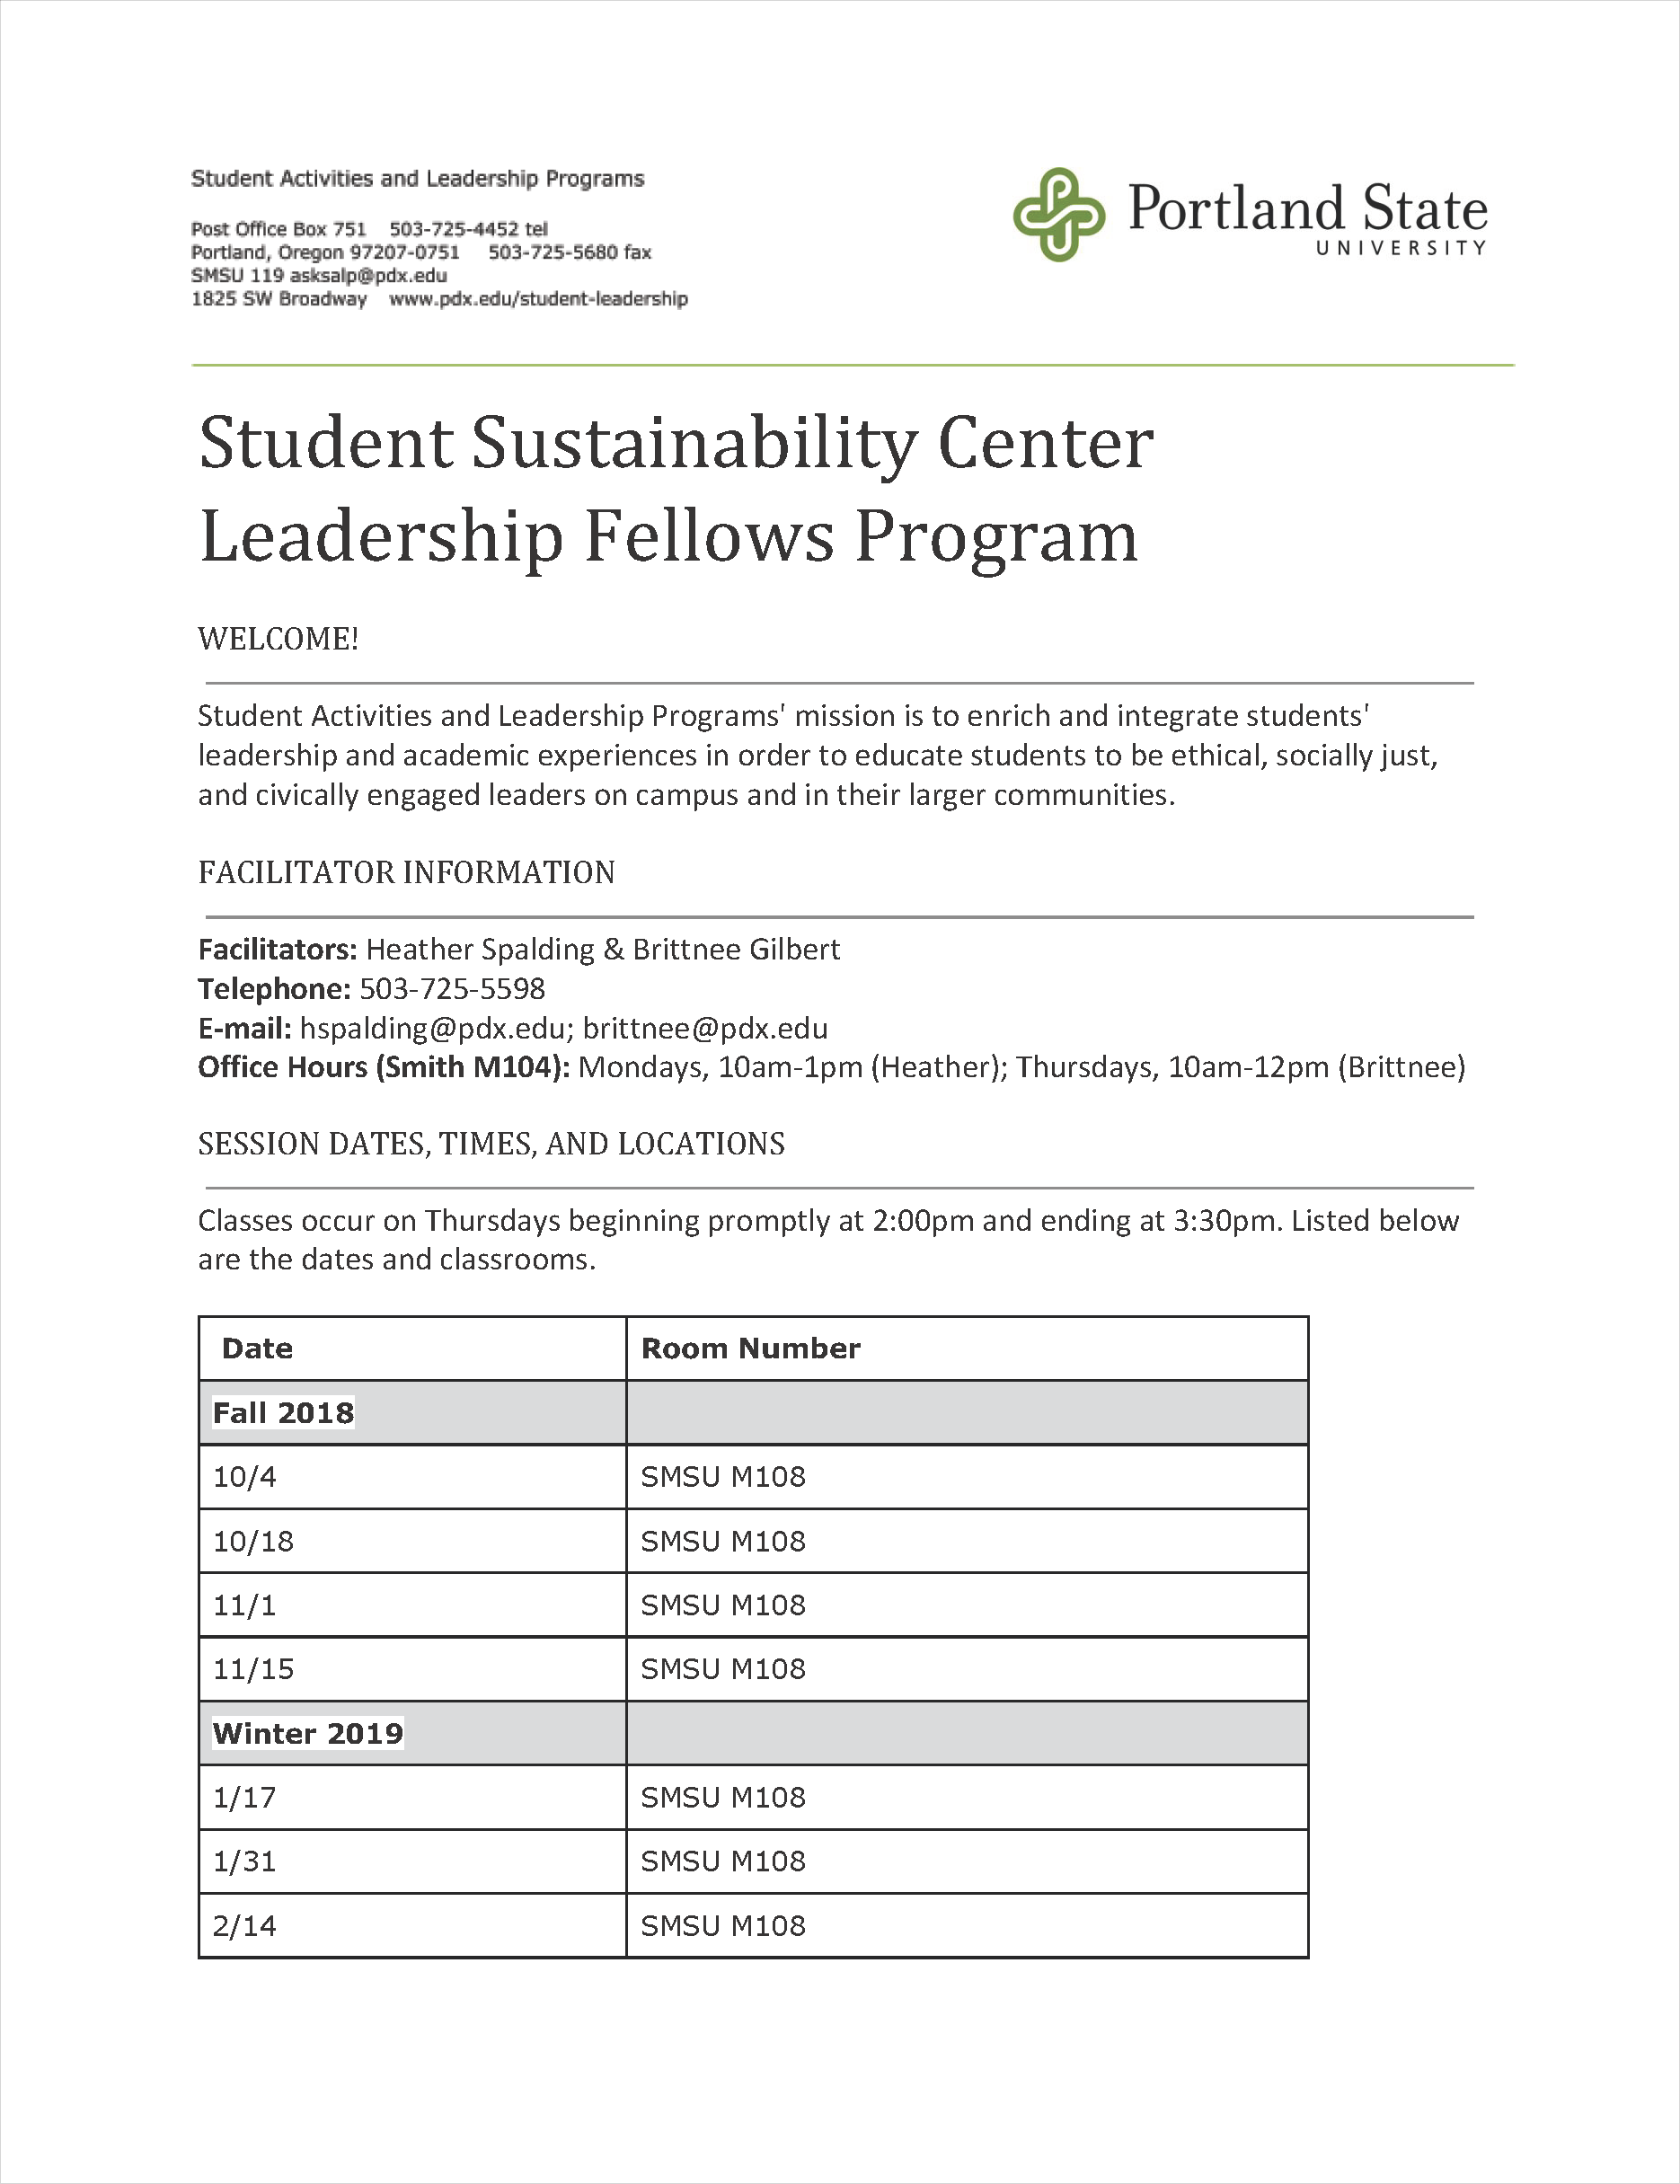 Spalding, Heather -- Submission - The Leadership Fellows Program (2018-19)_Page_1.png